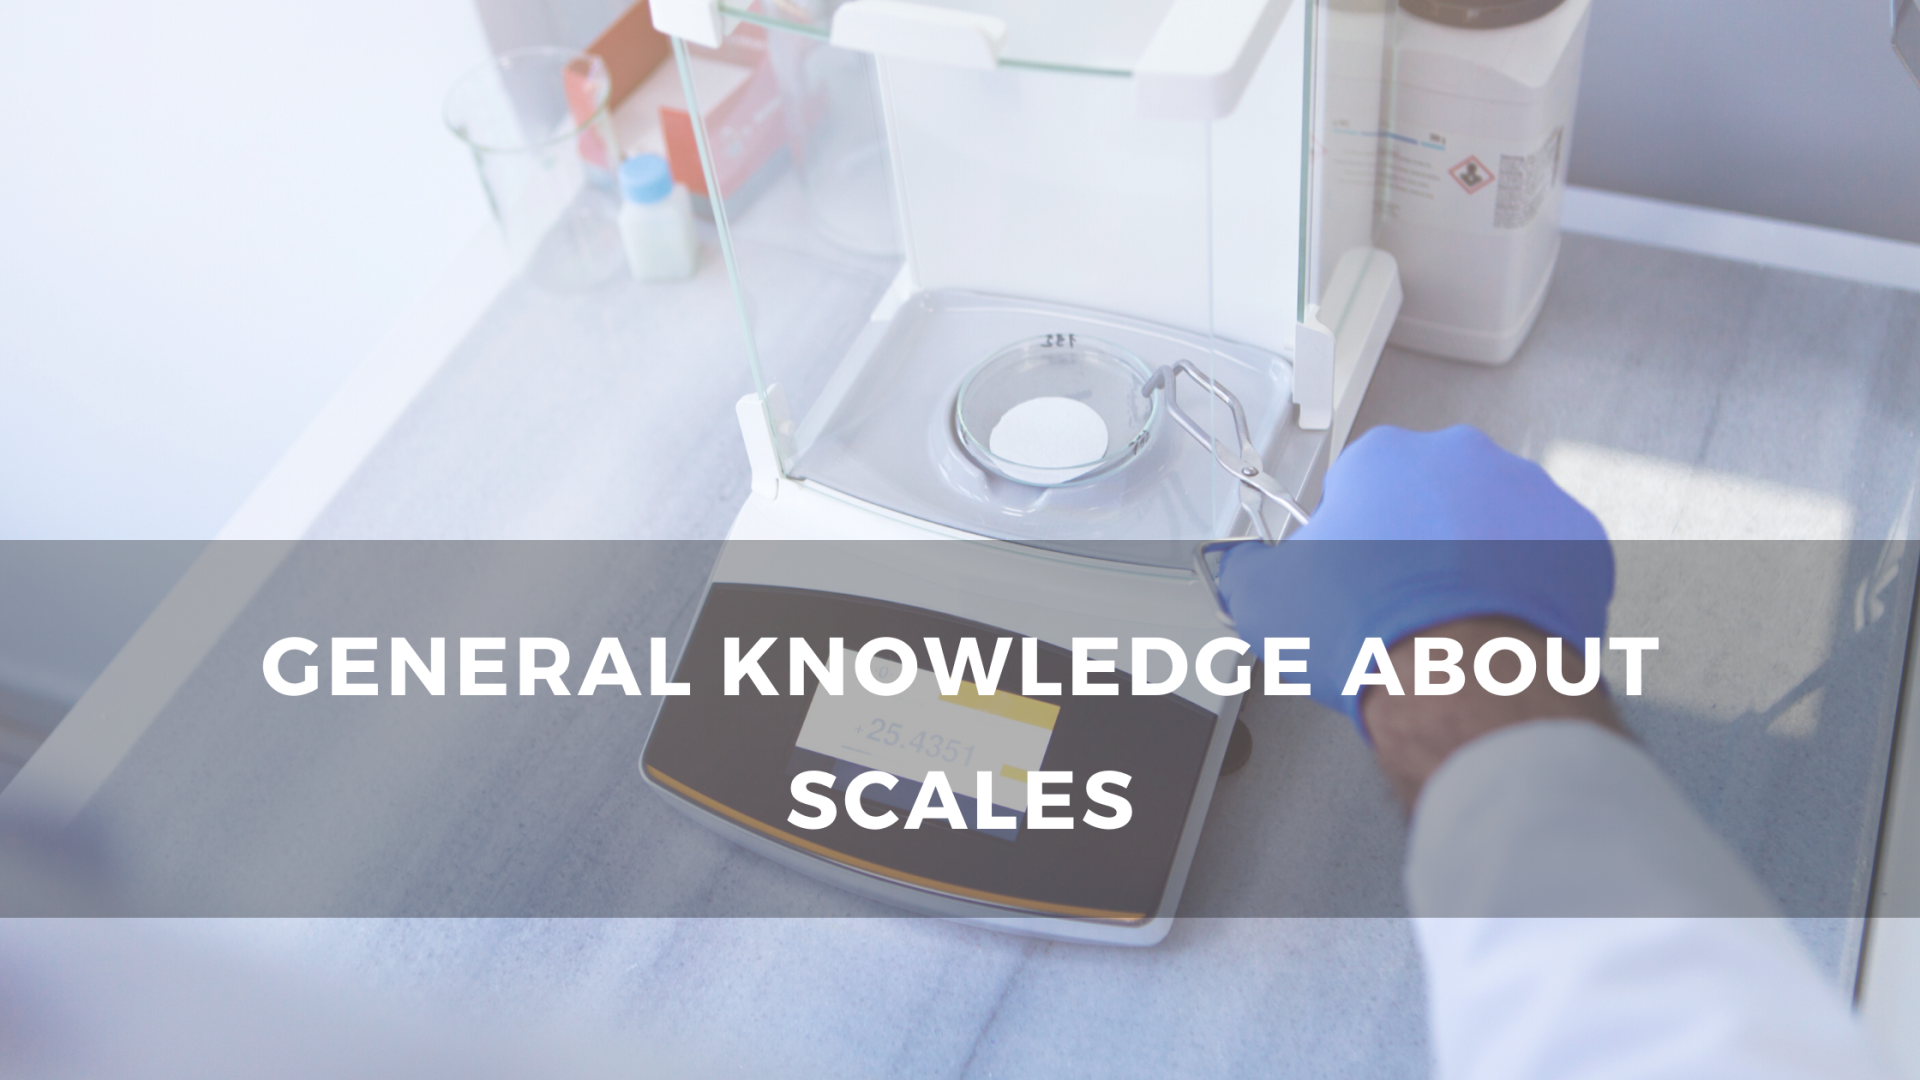 General knowledge about scales